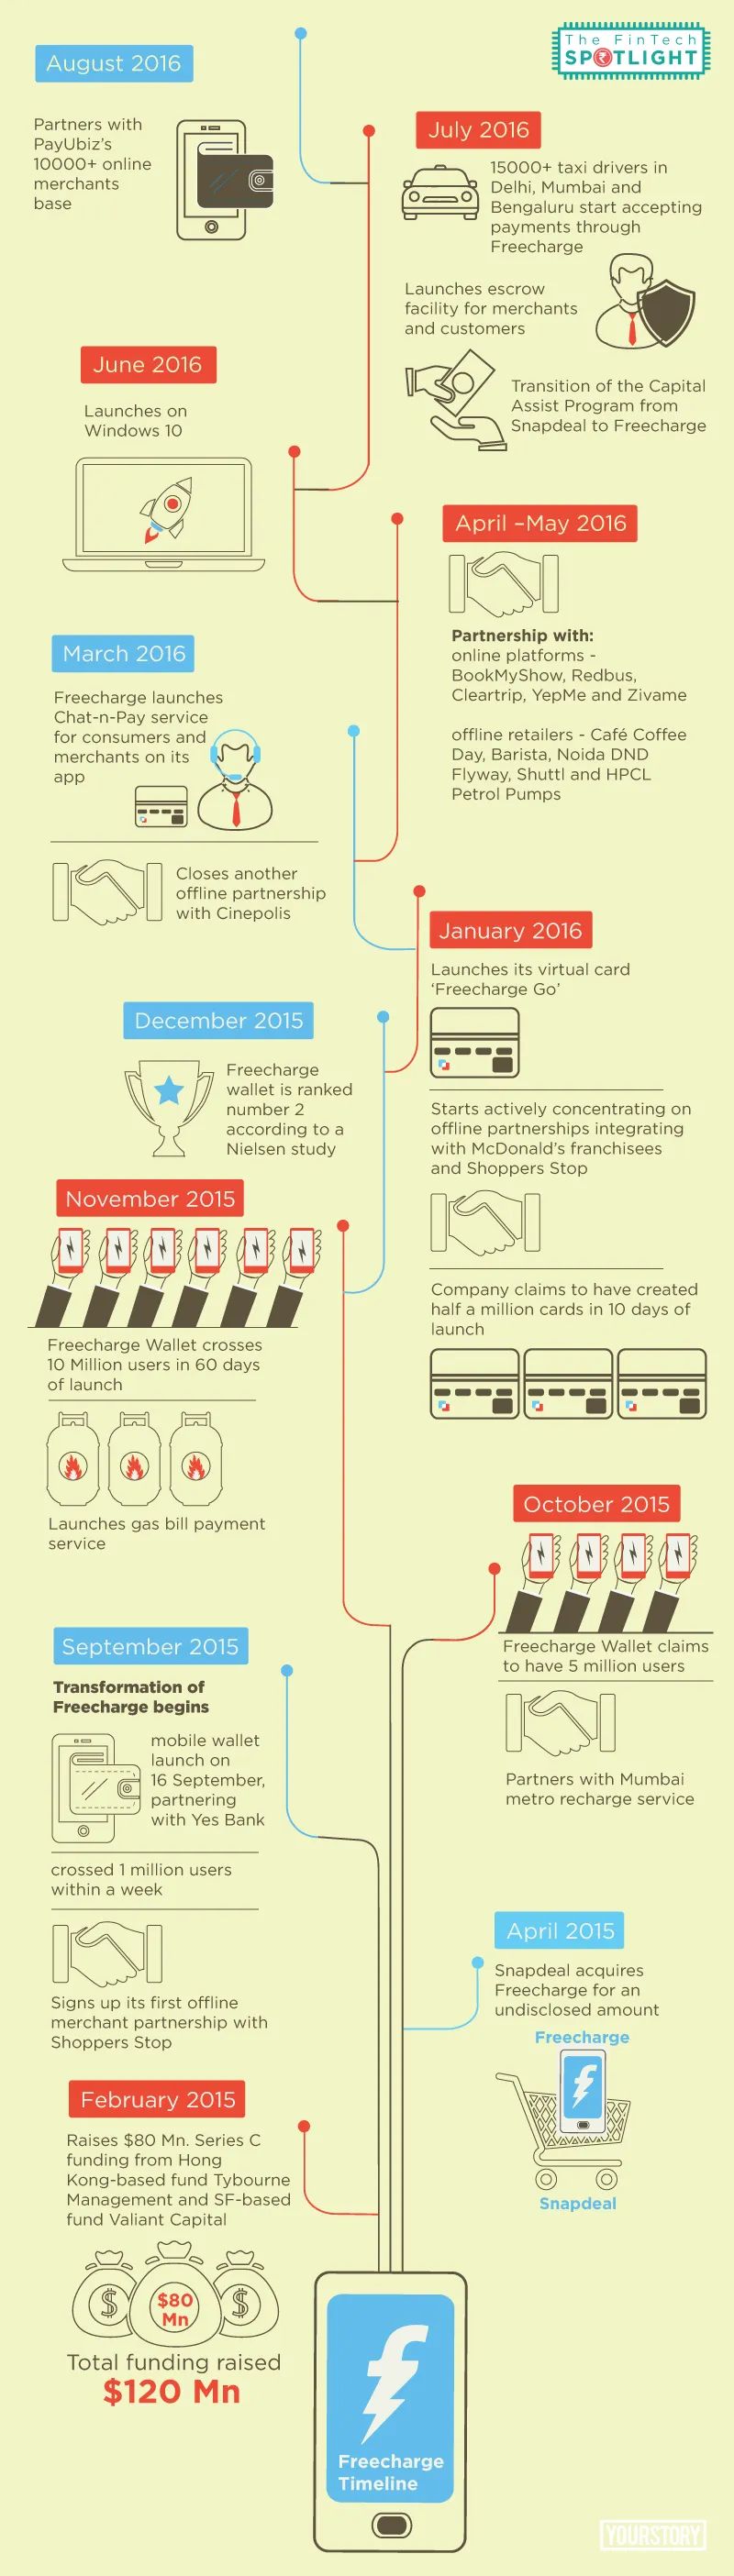 FreeCharge-timeline-infographic-yourstory (1)